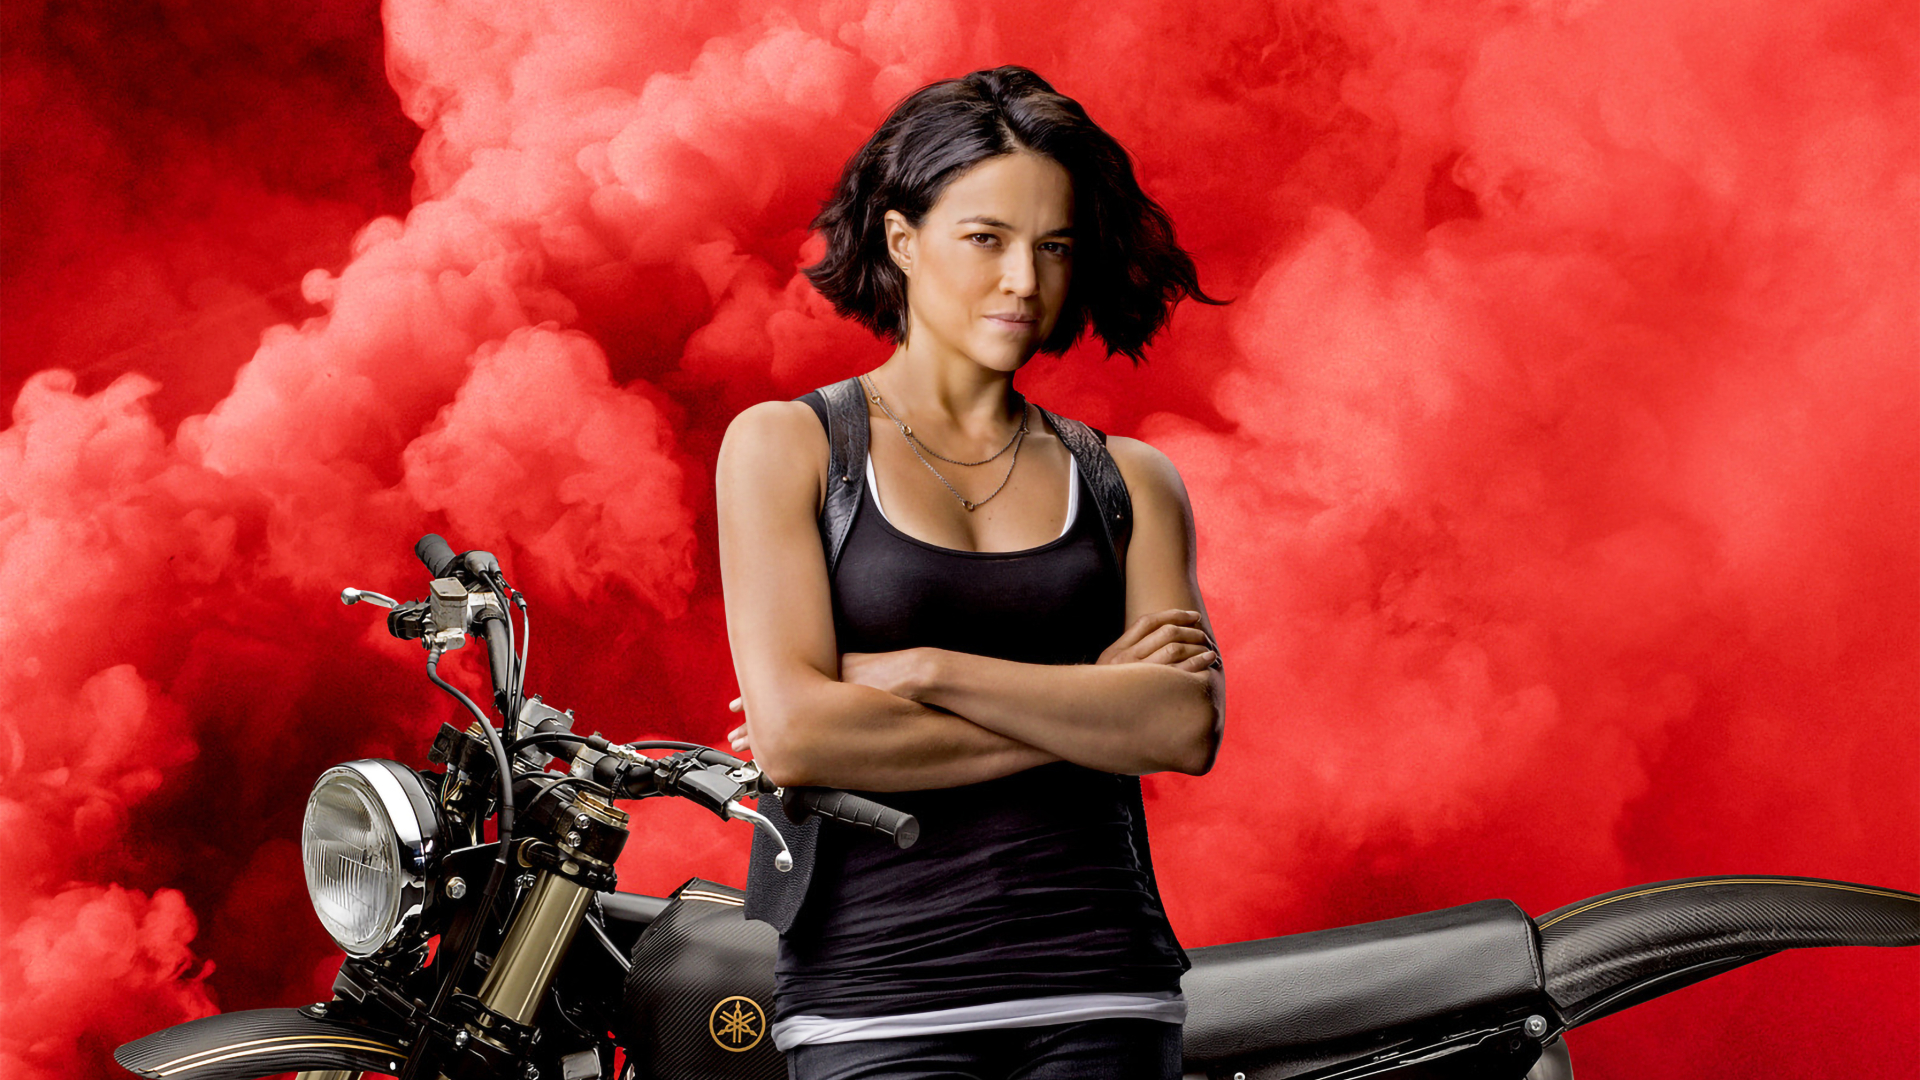 1920x1080 Michelle Rodriguez Fast And Furious 9 1080p Laptop Full Hd Wallpaper Hd Movies 4k